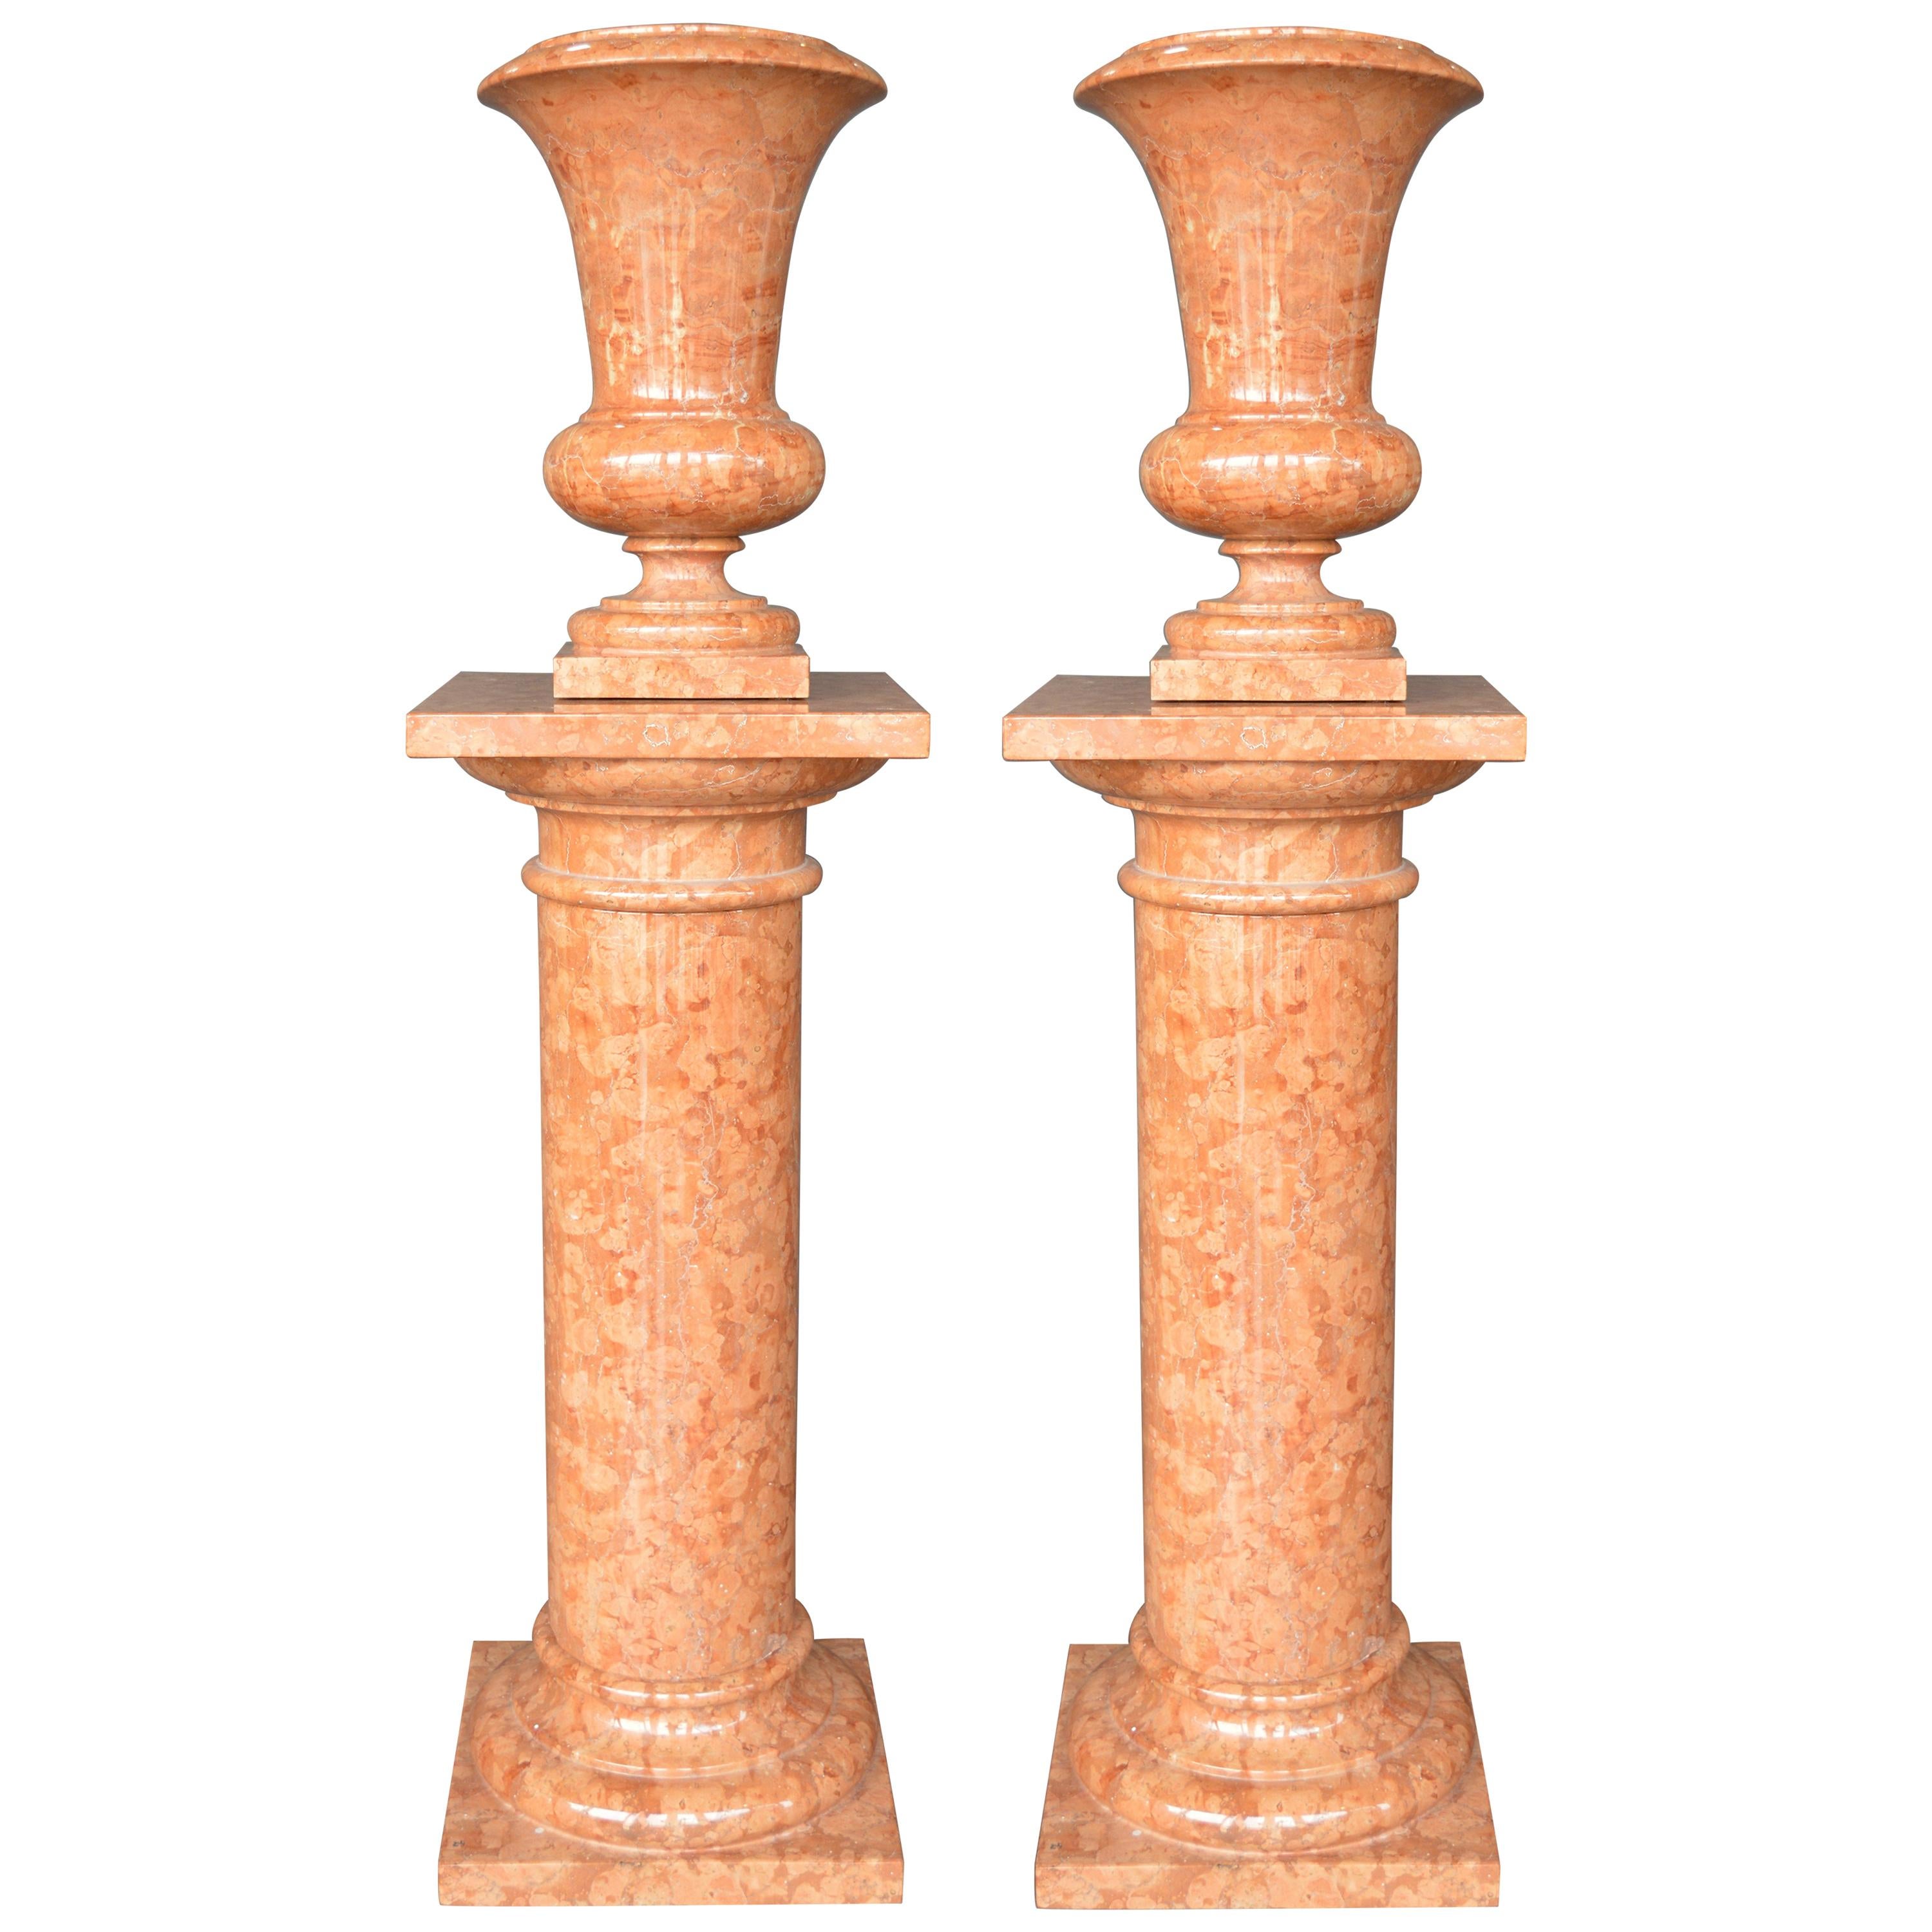 Pair of 20th Century Italian Marble Pedestals with Urns